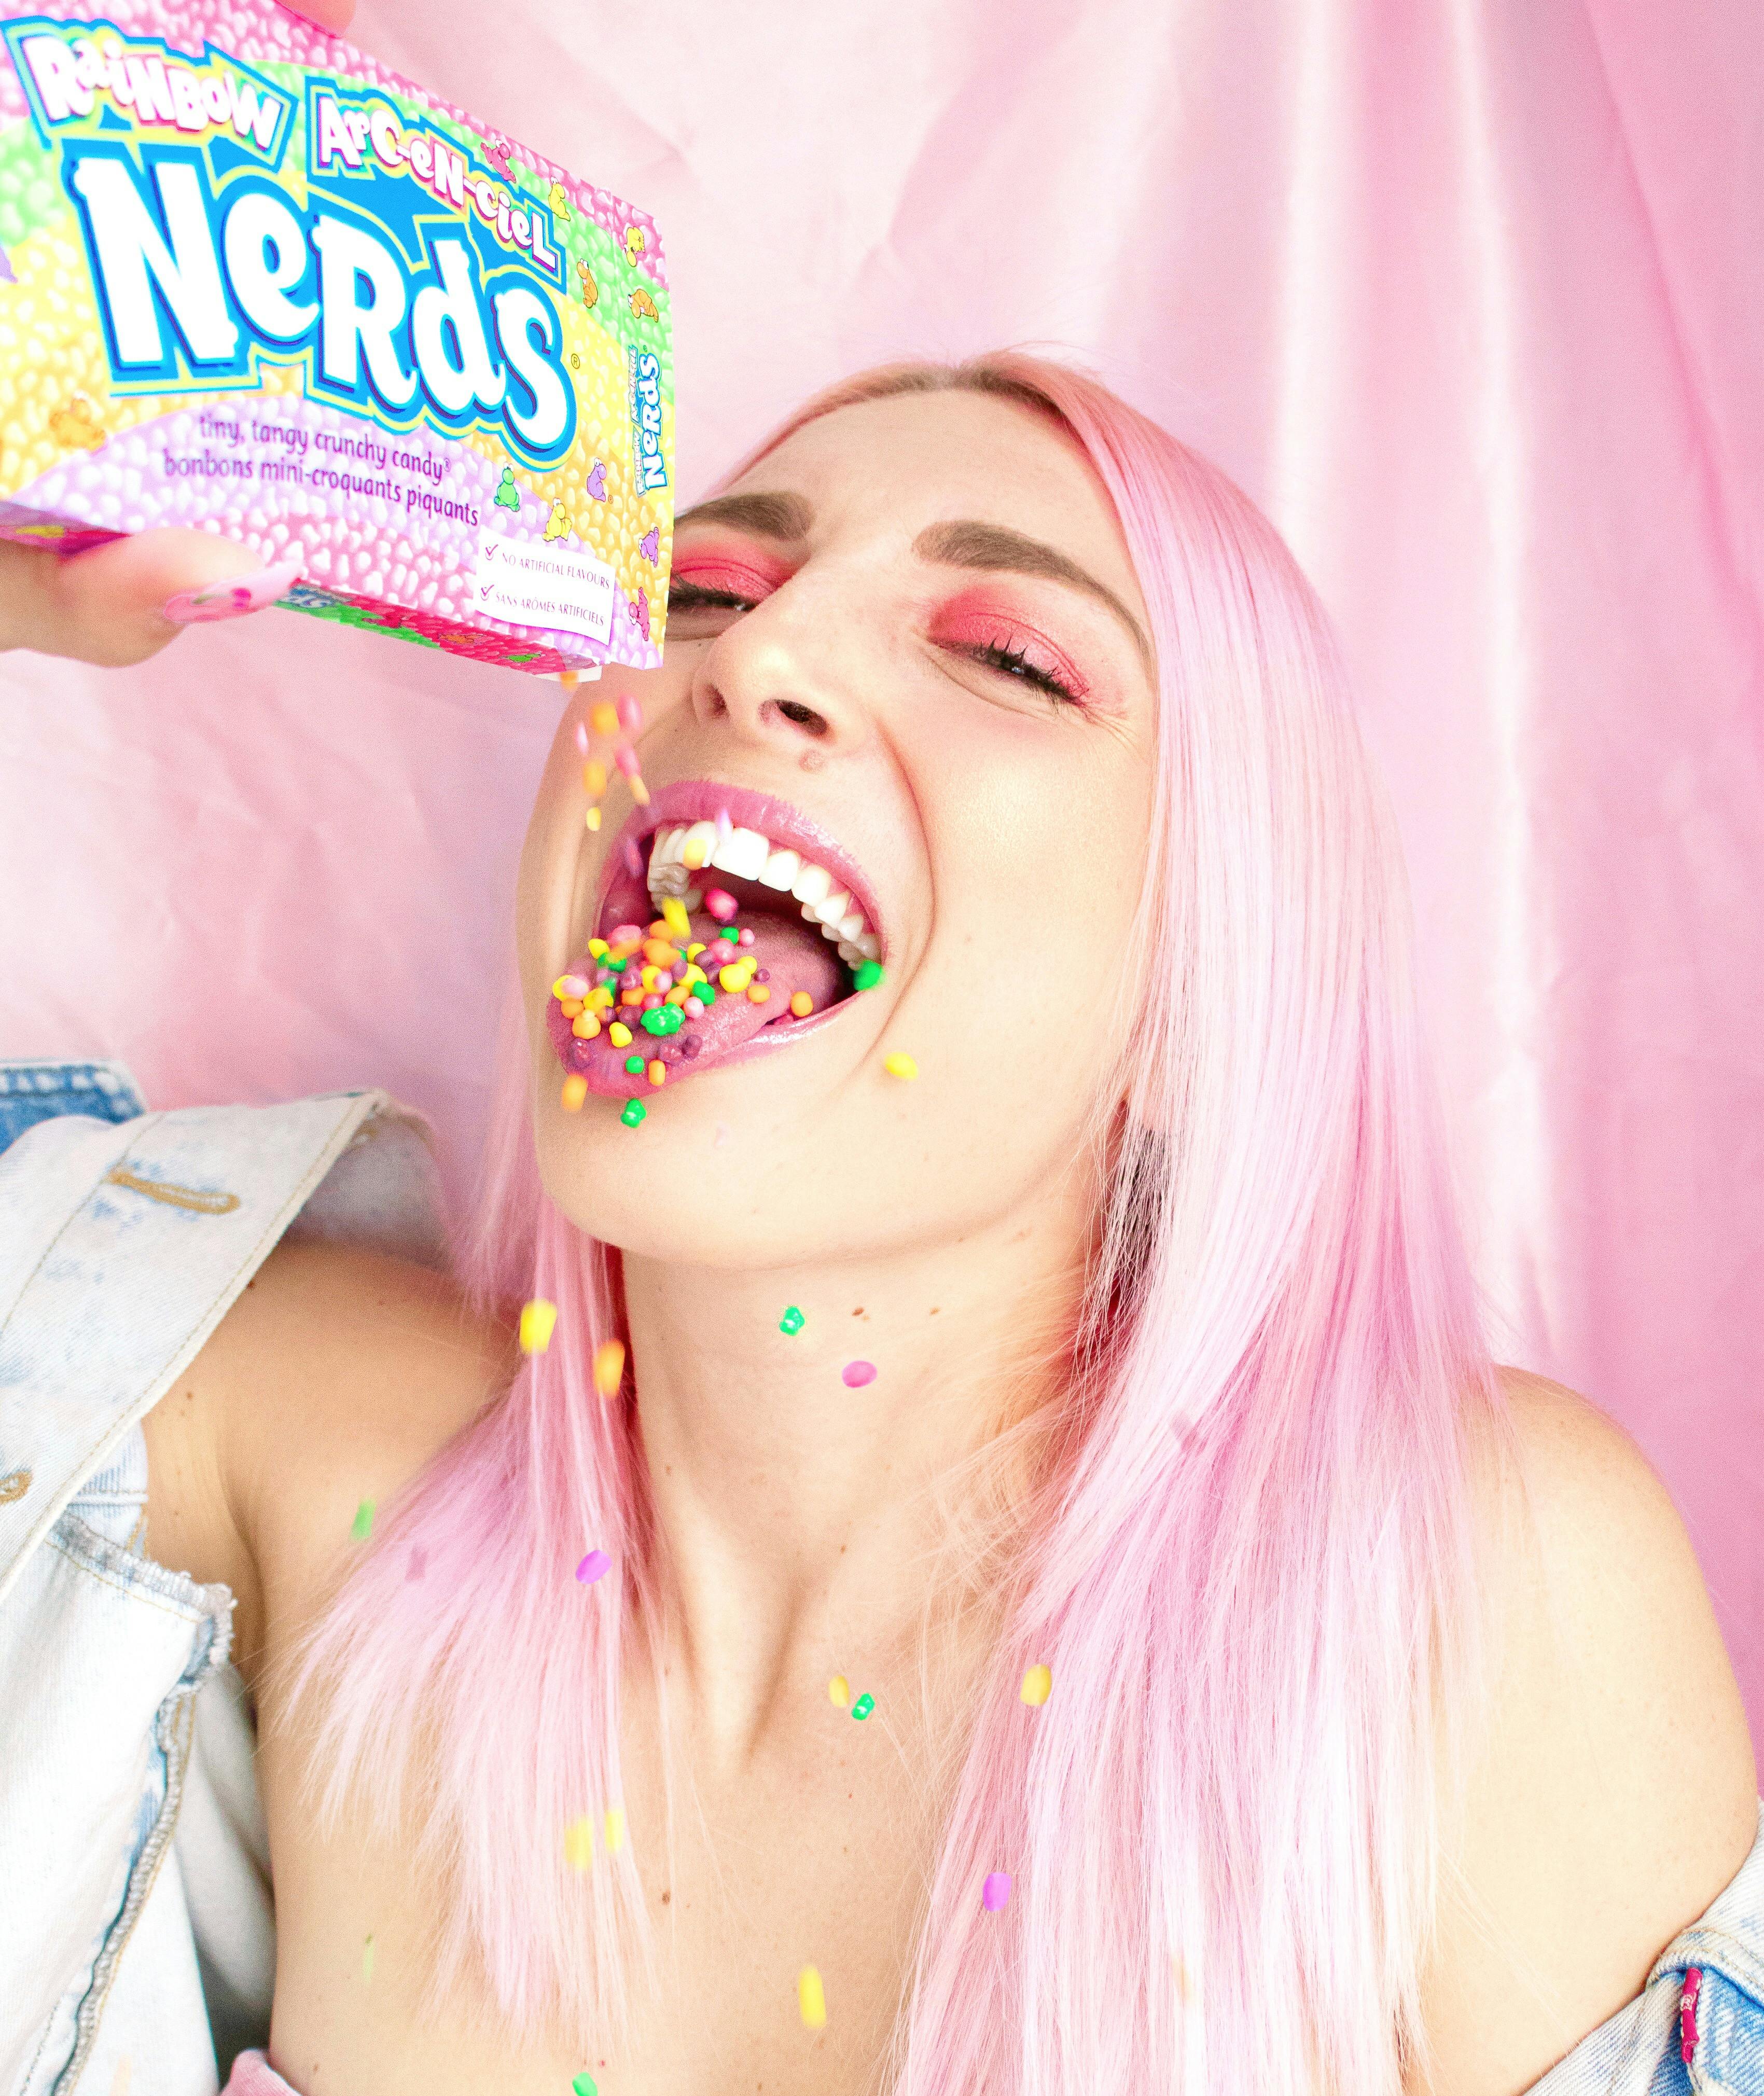 Nerds Candy Stock Photos and Images  123RF